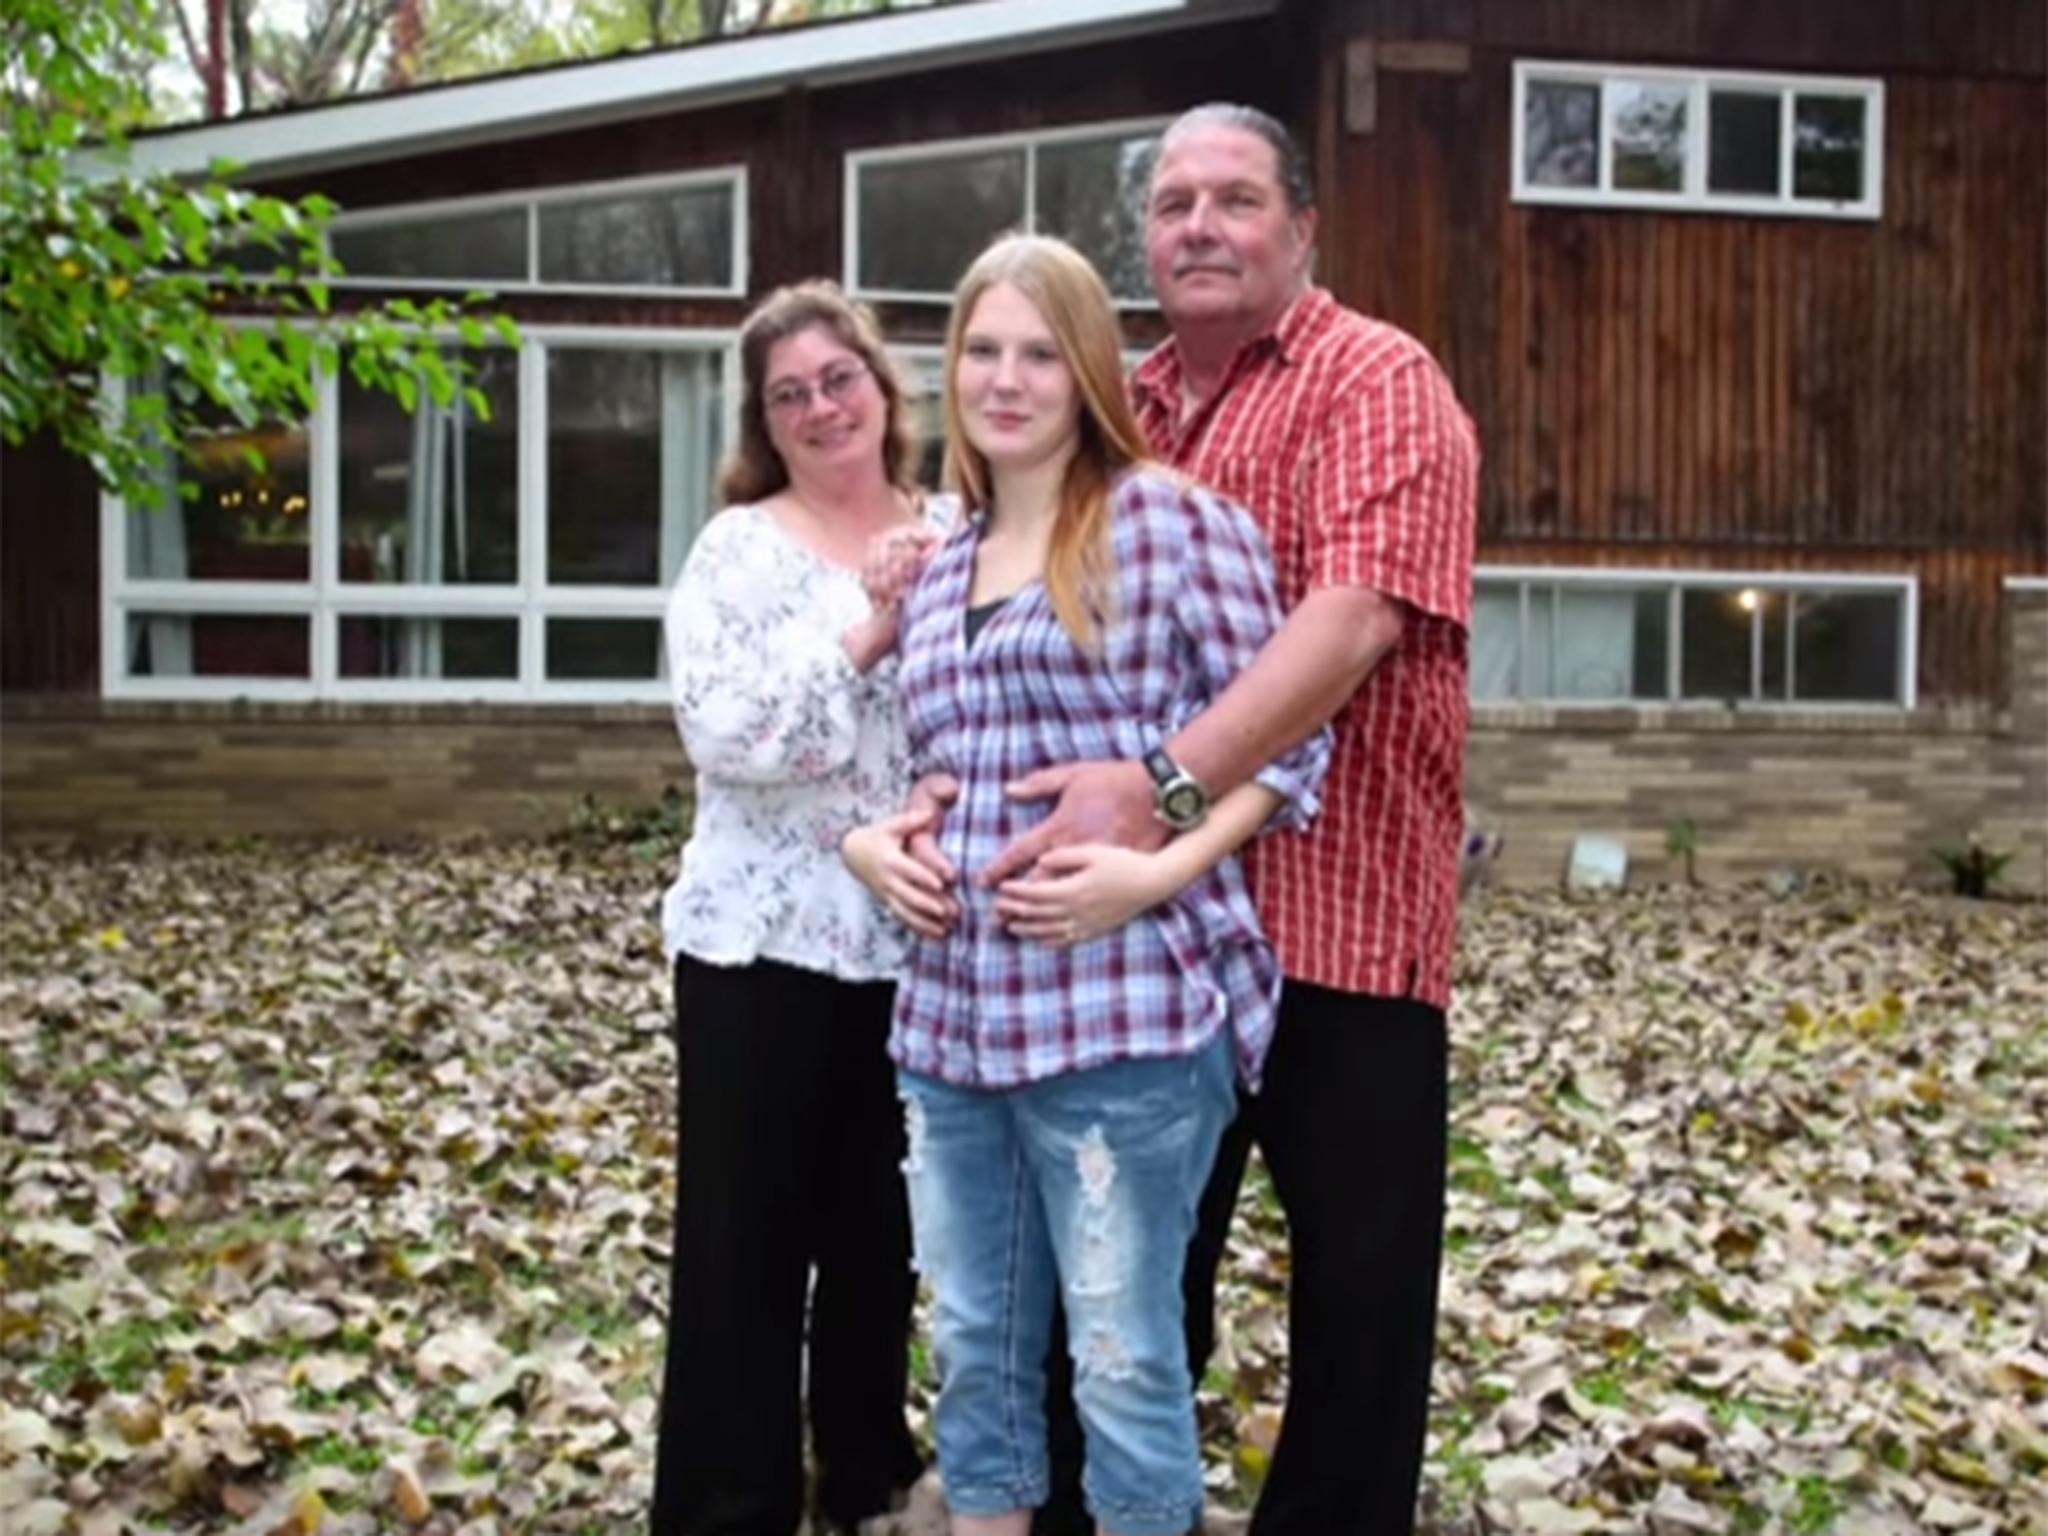 Thom Miller, with his two wives, Belinda and pregnant Reba